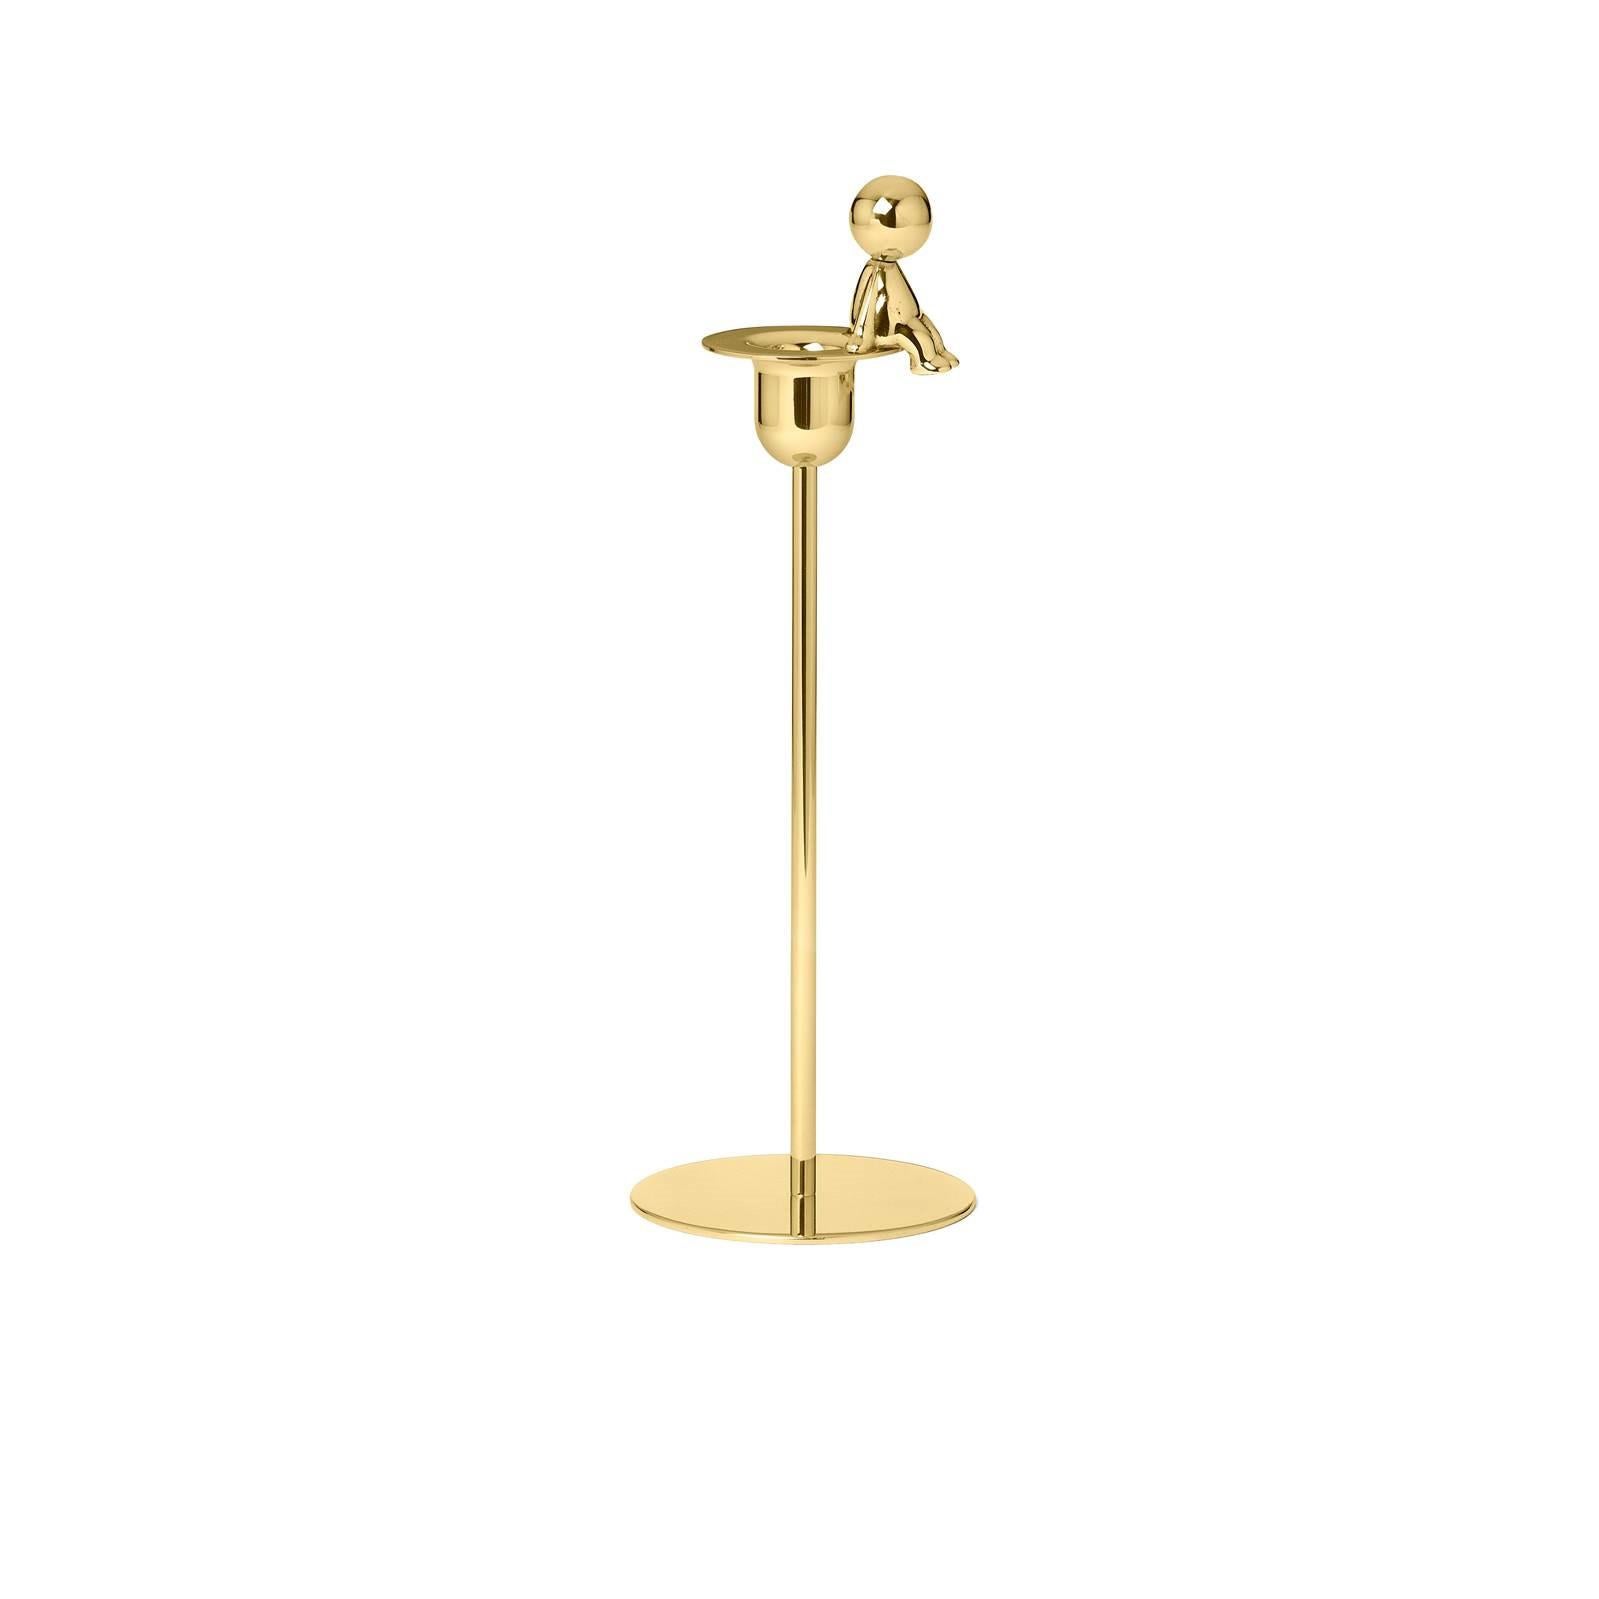 Candleholder in brass
Omini is a family of products that plays on the inclusion and the relationship between the human figure with a series of monolithic objects from geometric and minimalist design. Small Lilliputians attack and animate the pure